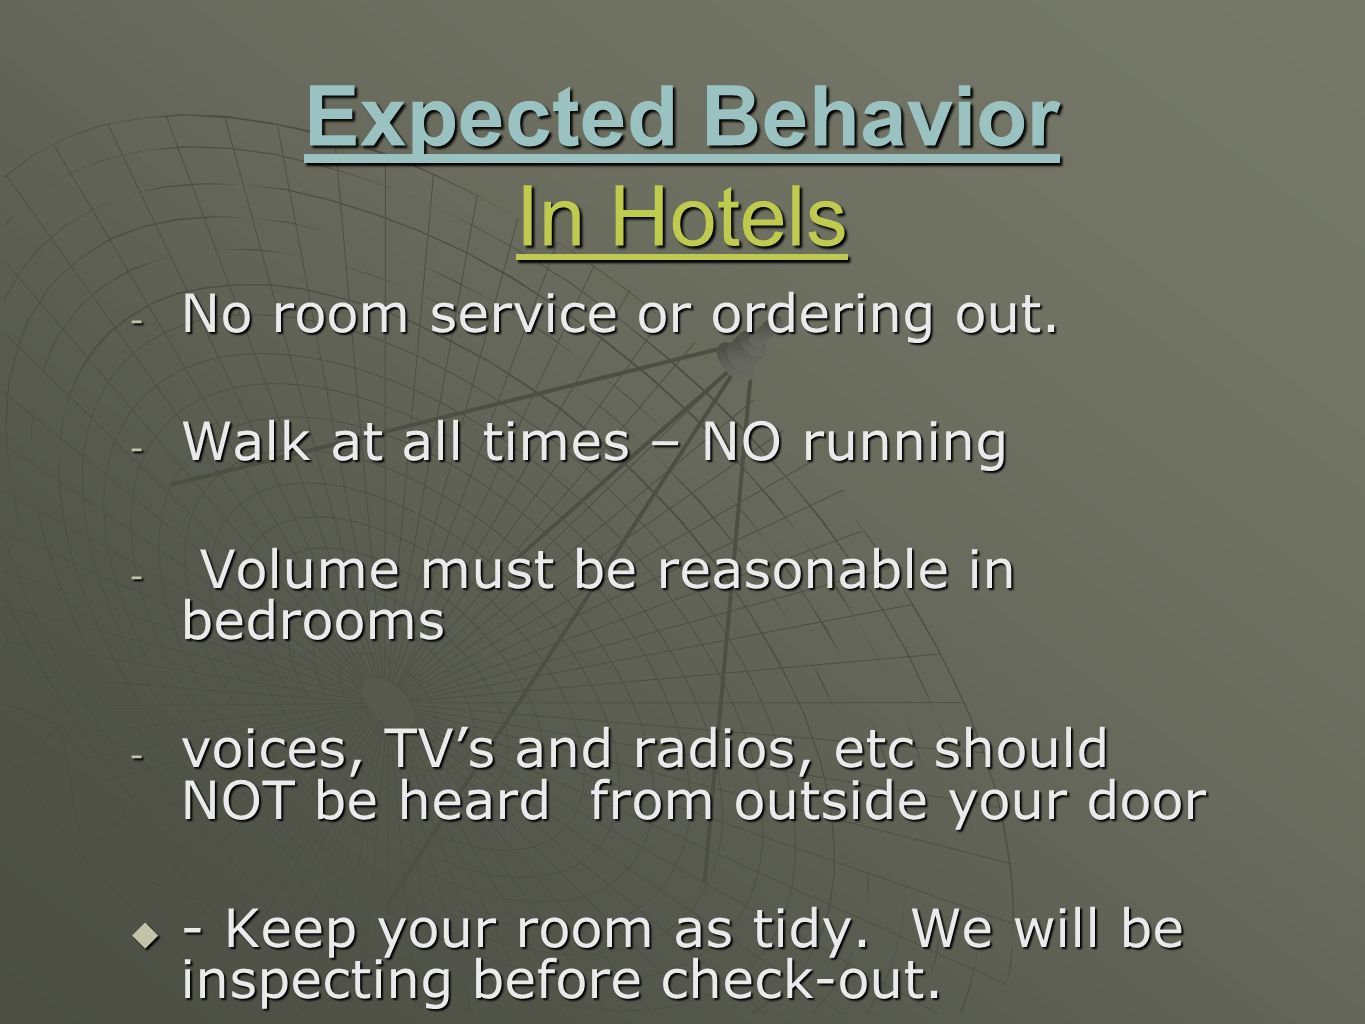 Expected Behavior In Hotels - No room service or ordering out.